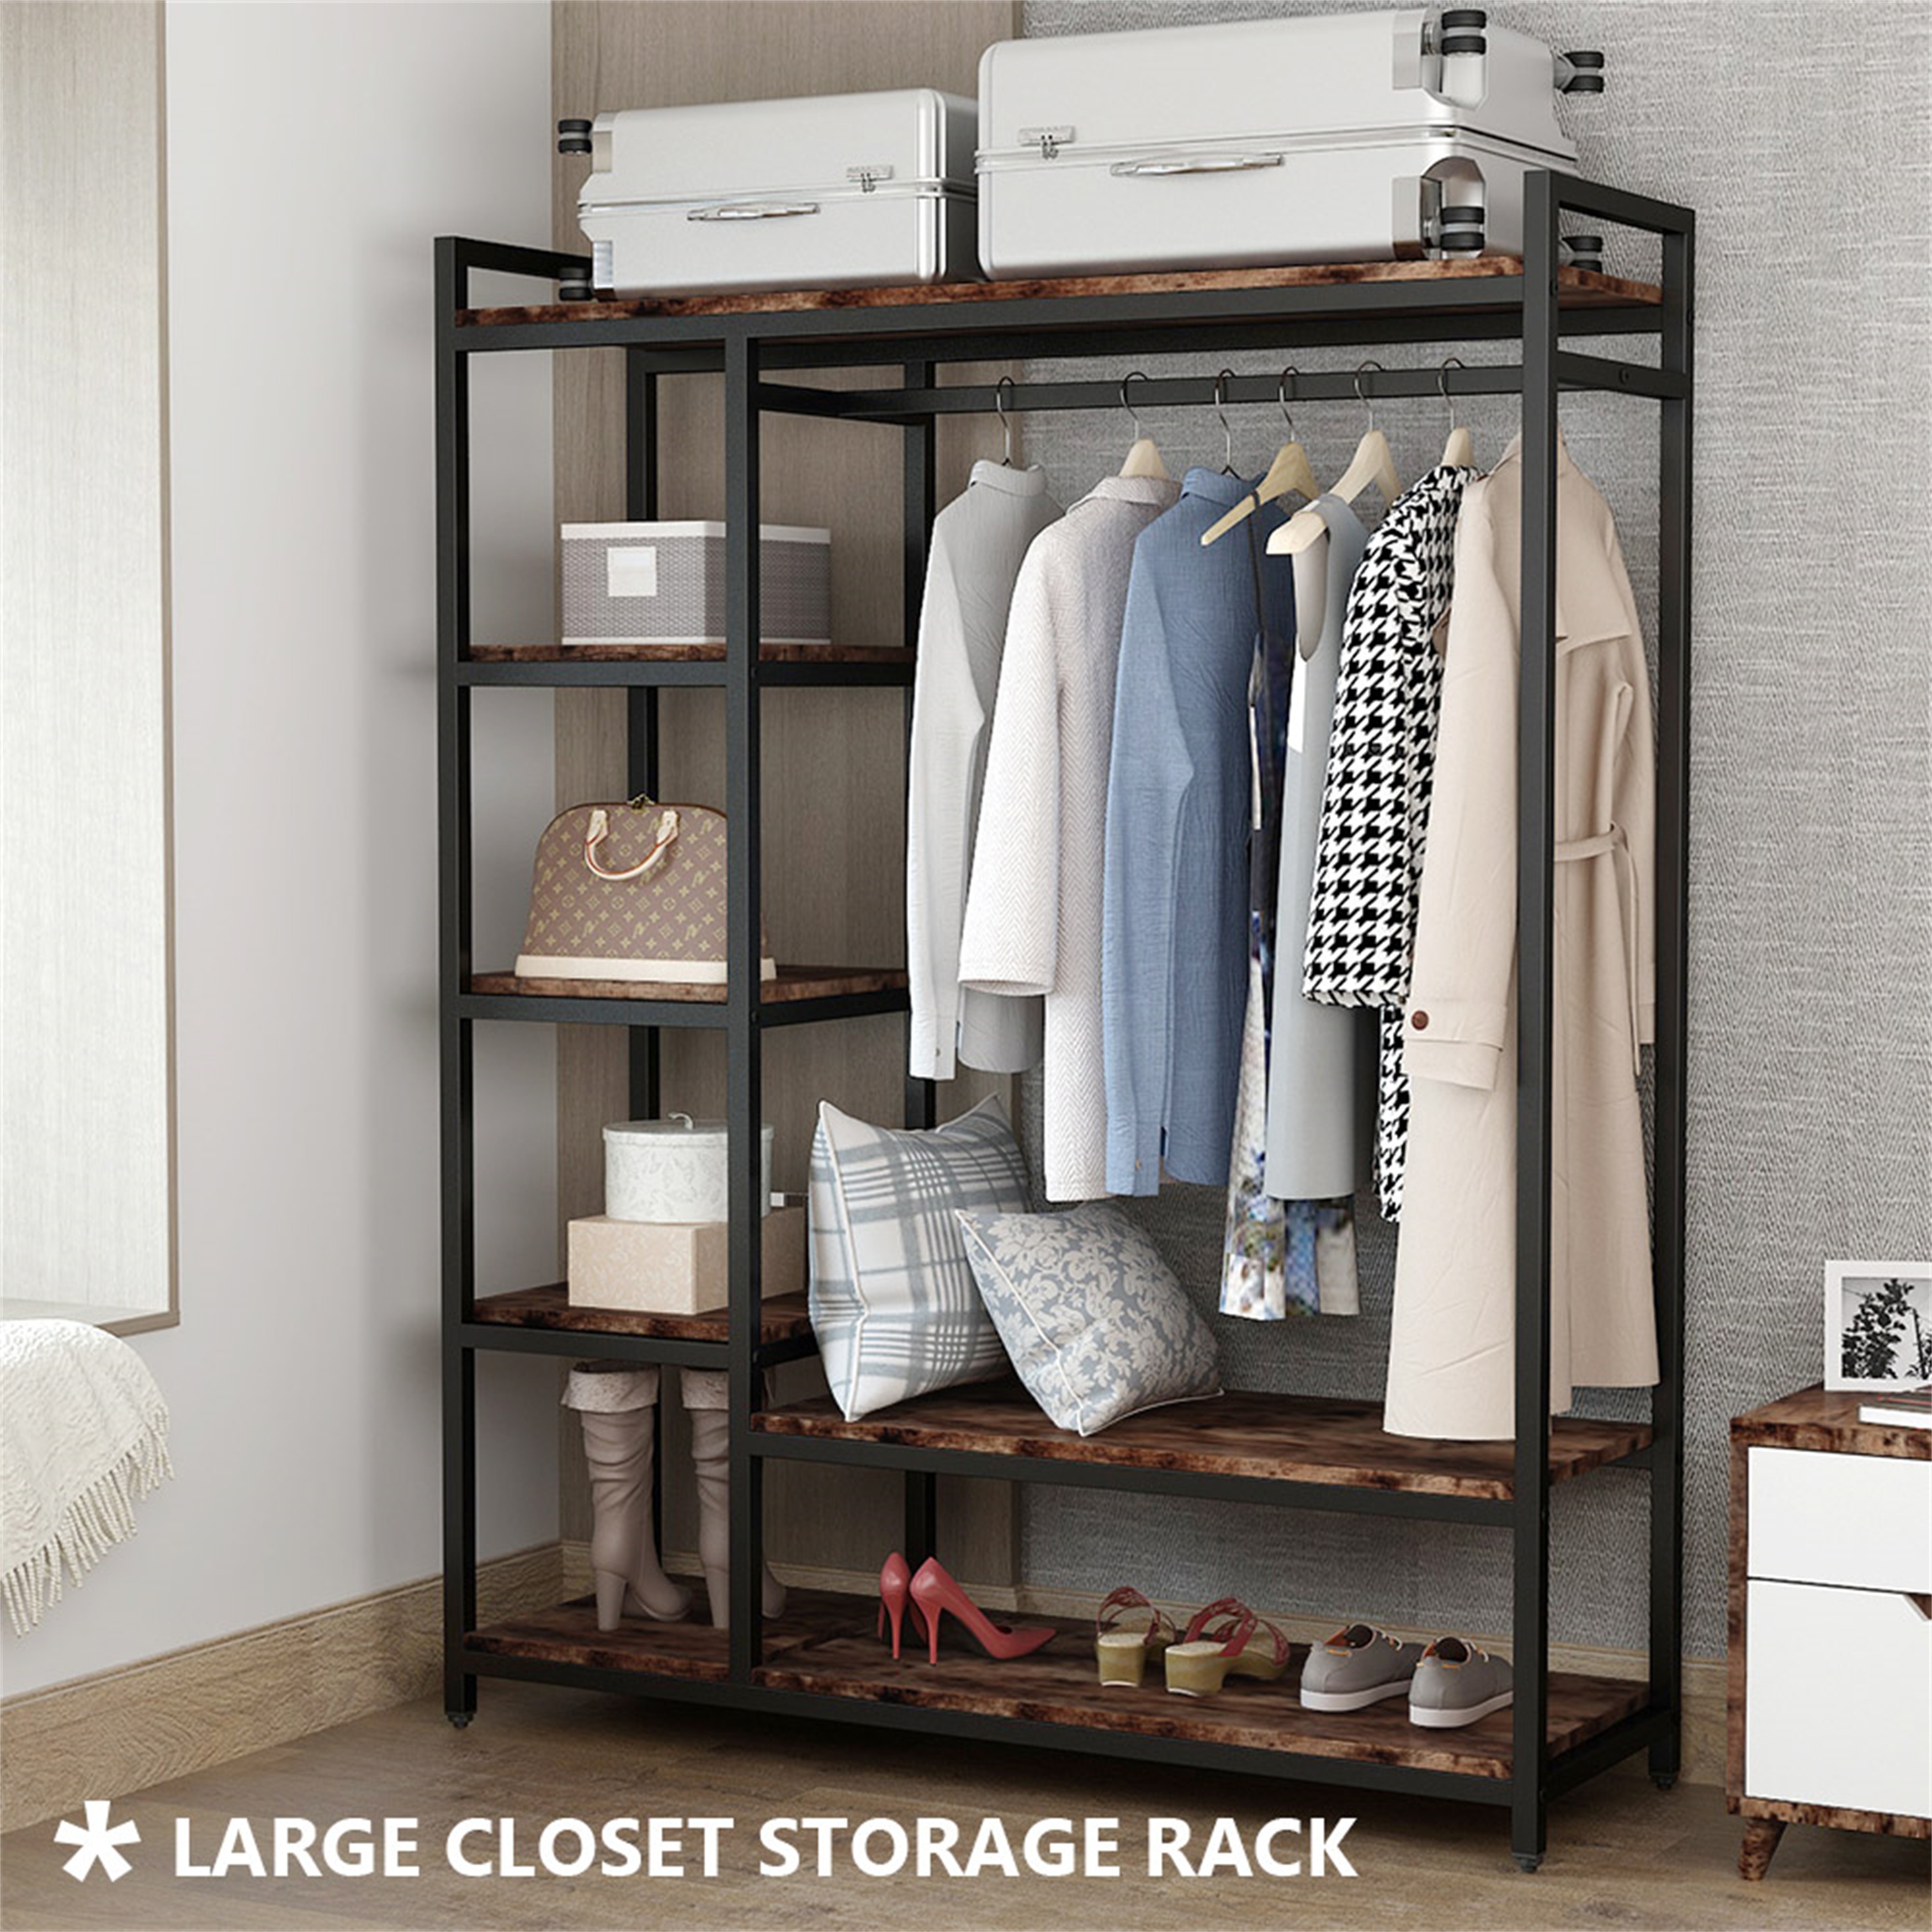  Clothing Garment Rack Metal Heavy Duty Double Rail Clothes Rack  Organizer 2-Tier Storage Shelf for Boxes Shoes Boots Commercial Grade  Multi-Purpose Entryway Shelving Unit for Home Office Bedroom Black : Home